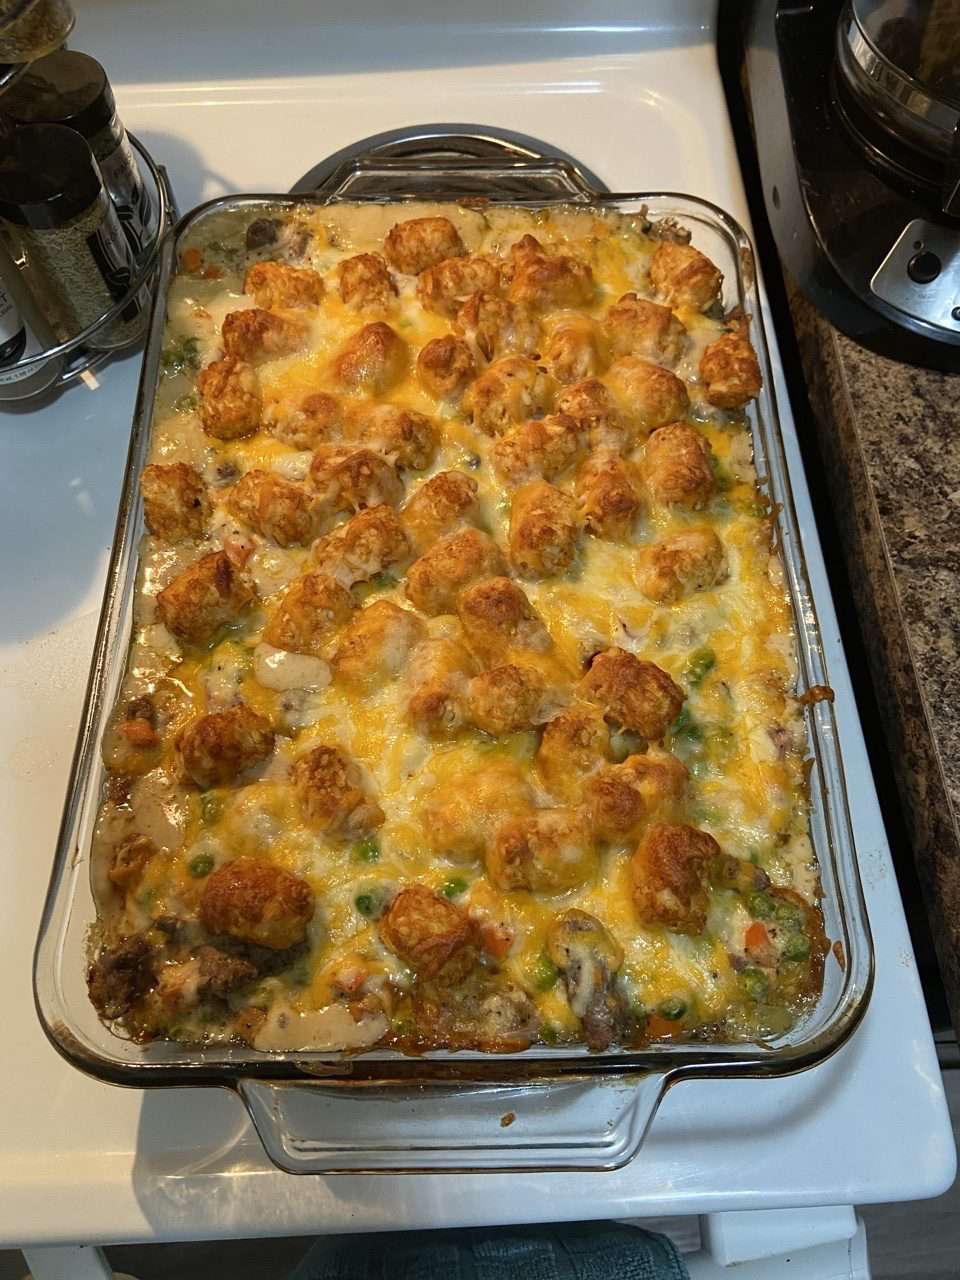 top-down view of a glass baking dish of cheese-topped Tater Tot casserole